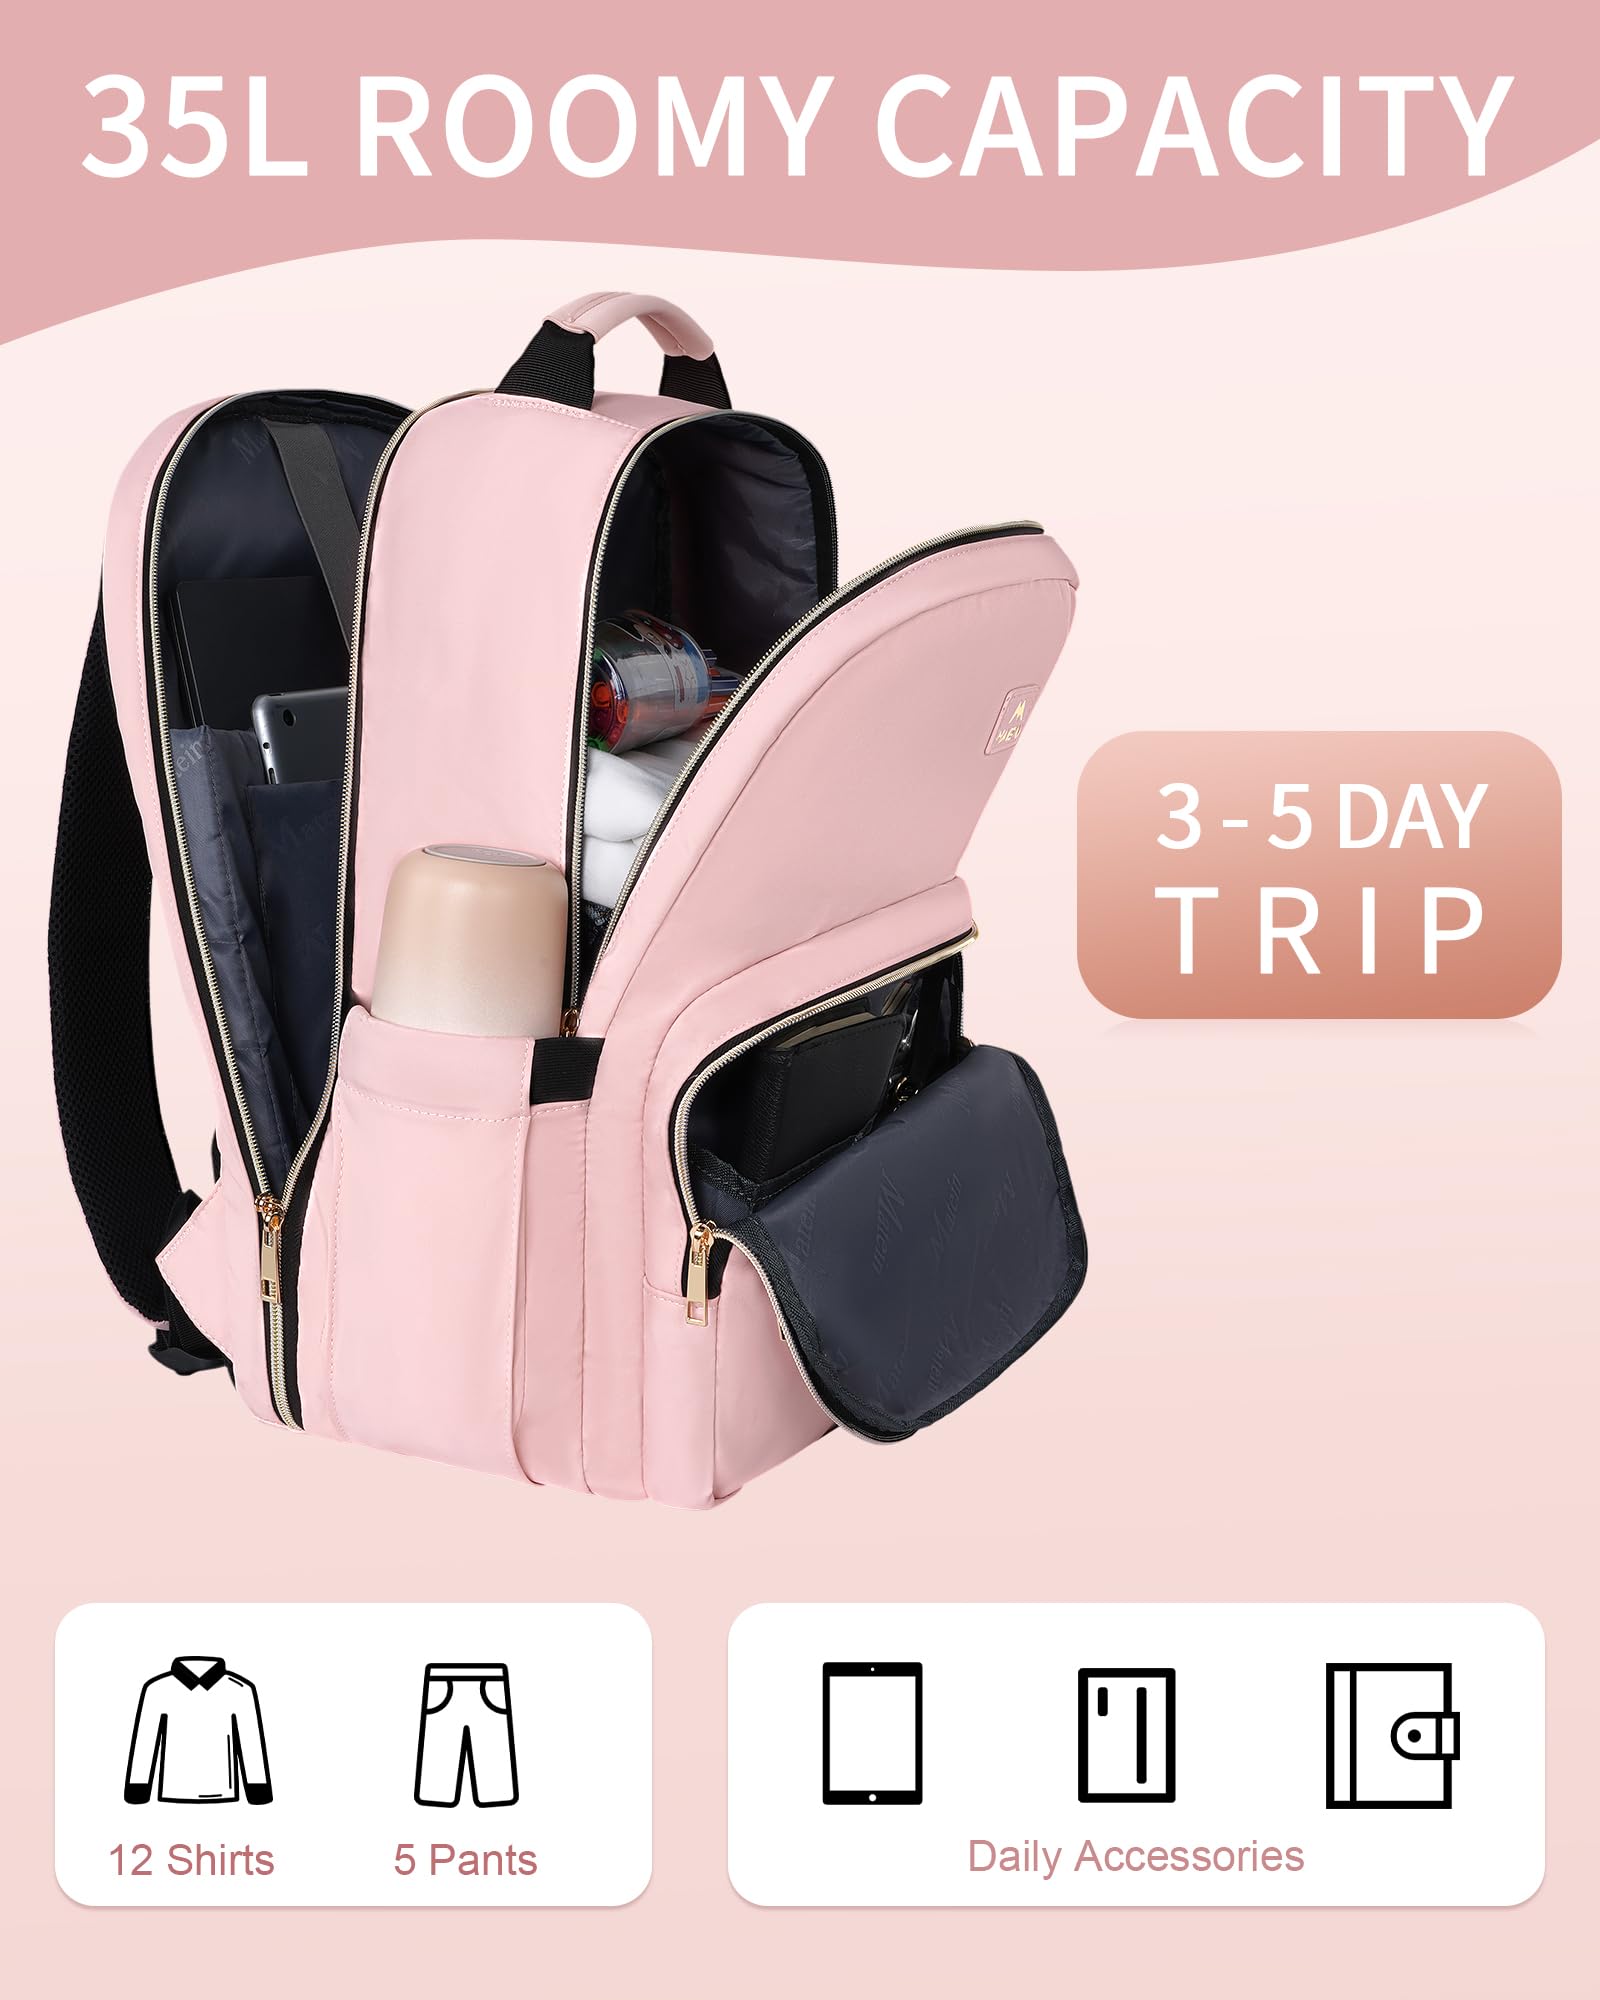 MATEIN Laptop Backpack 17 inch for Men & 17 Inch Pink Laptop Backpack for Women, Large Travel Backpack Personal Item Size TSA Airline Approved with Luggage Strap for Work